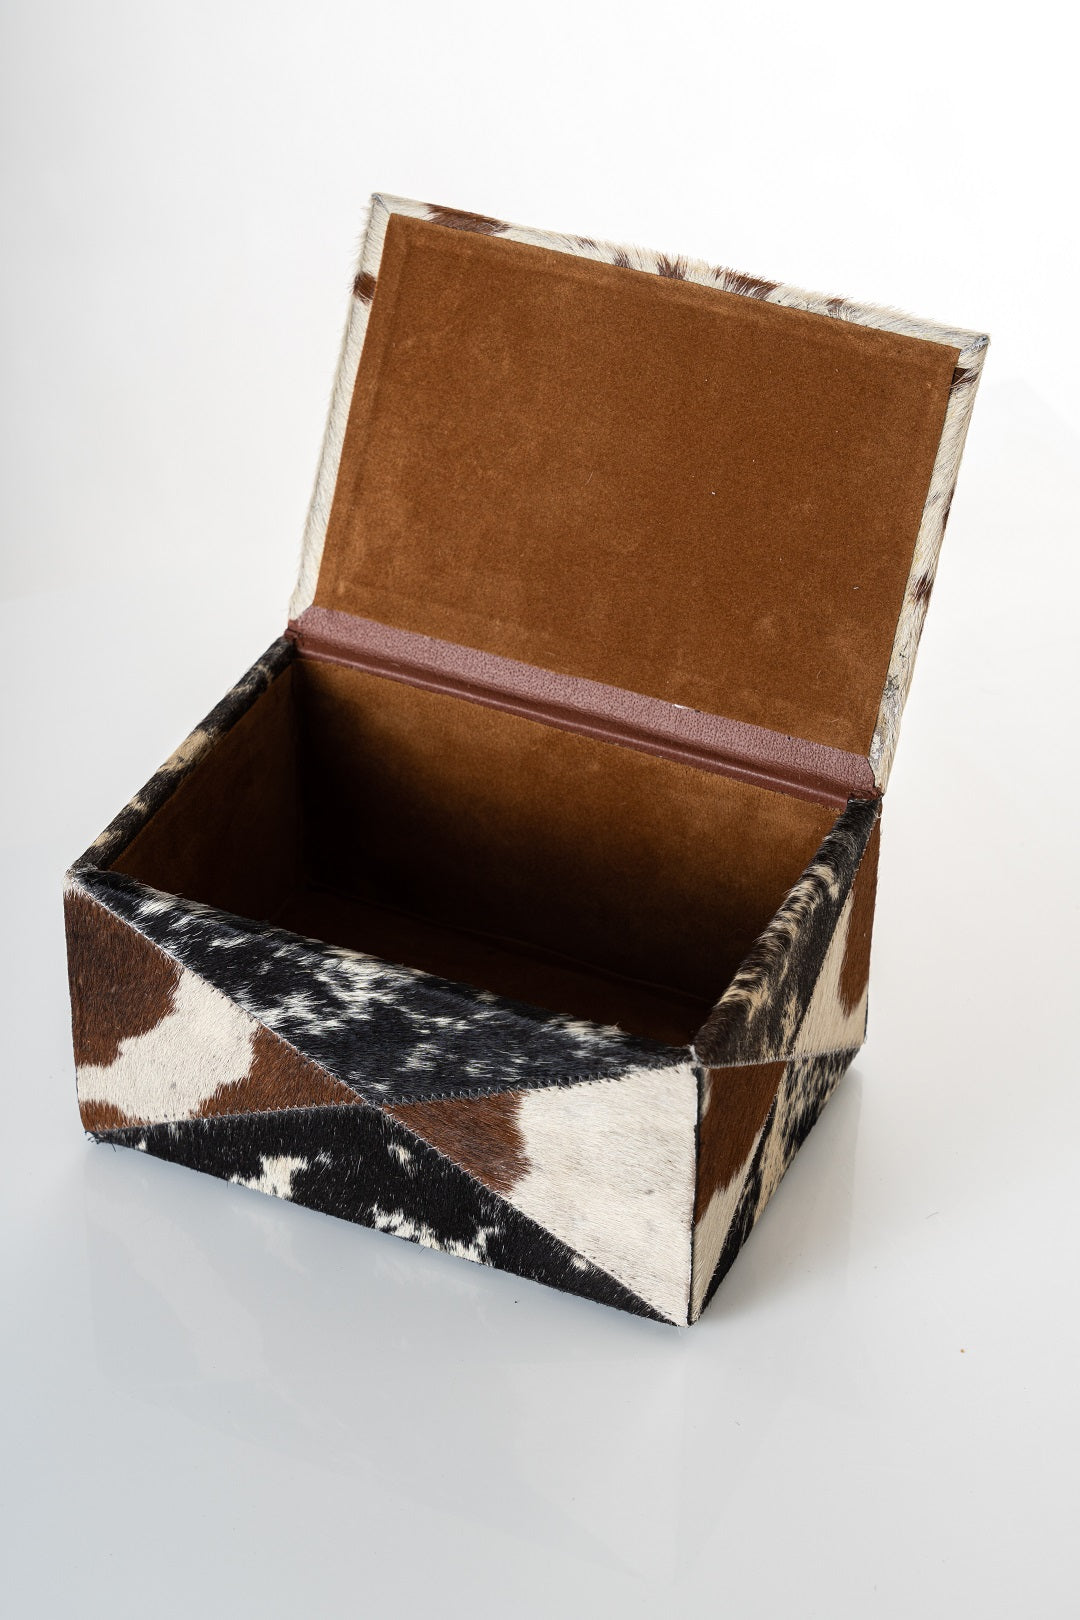 The Leather Tissue Box